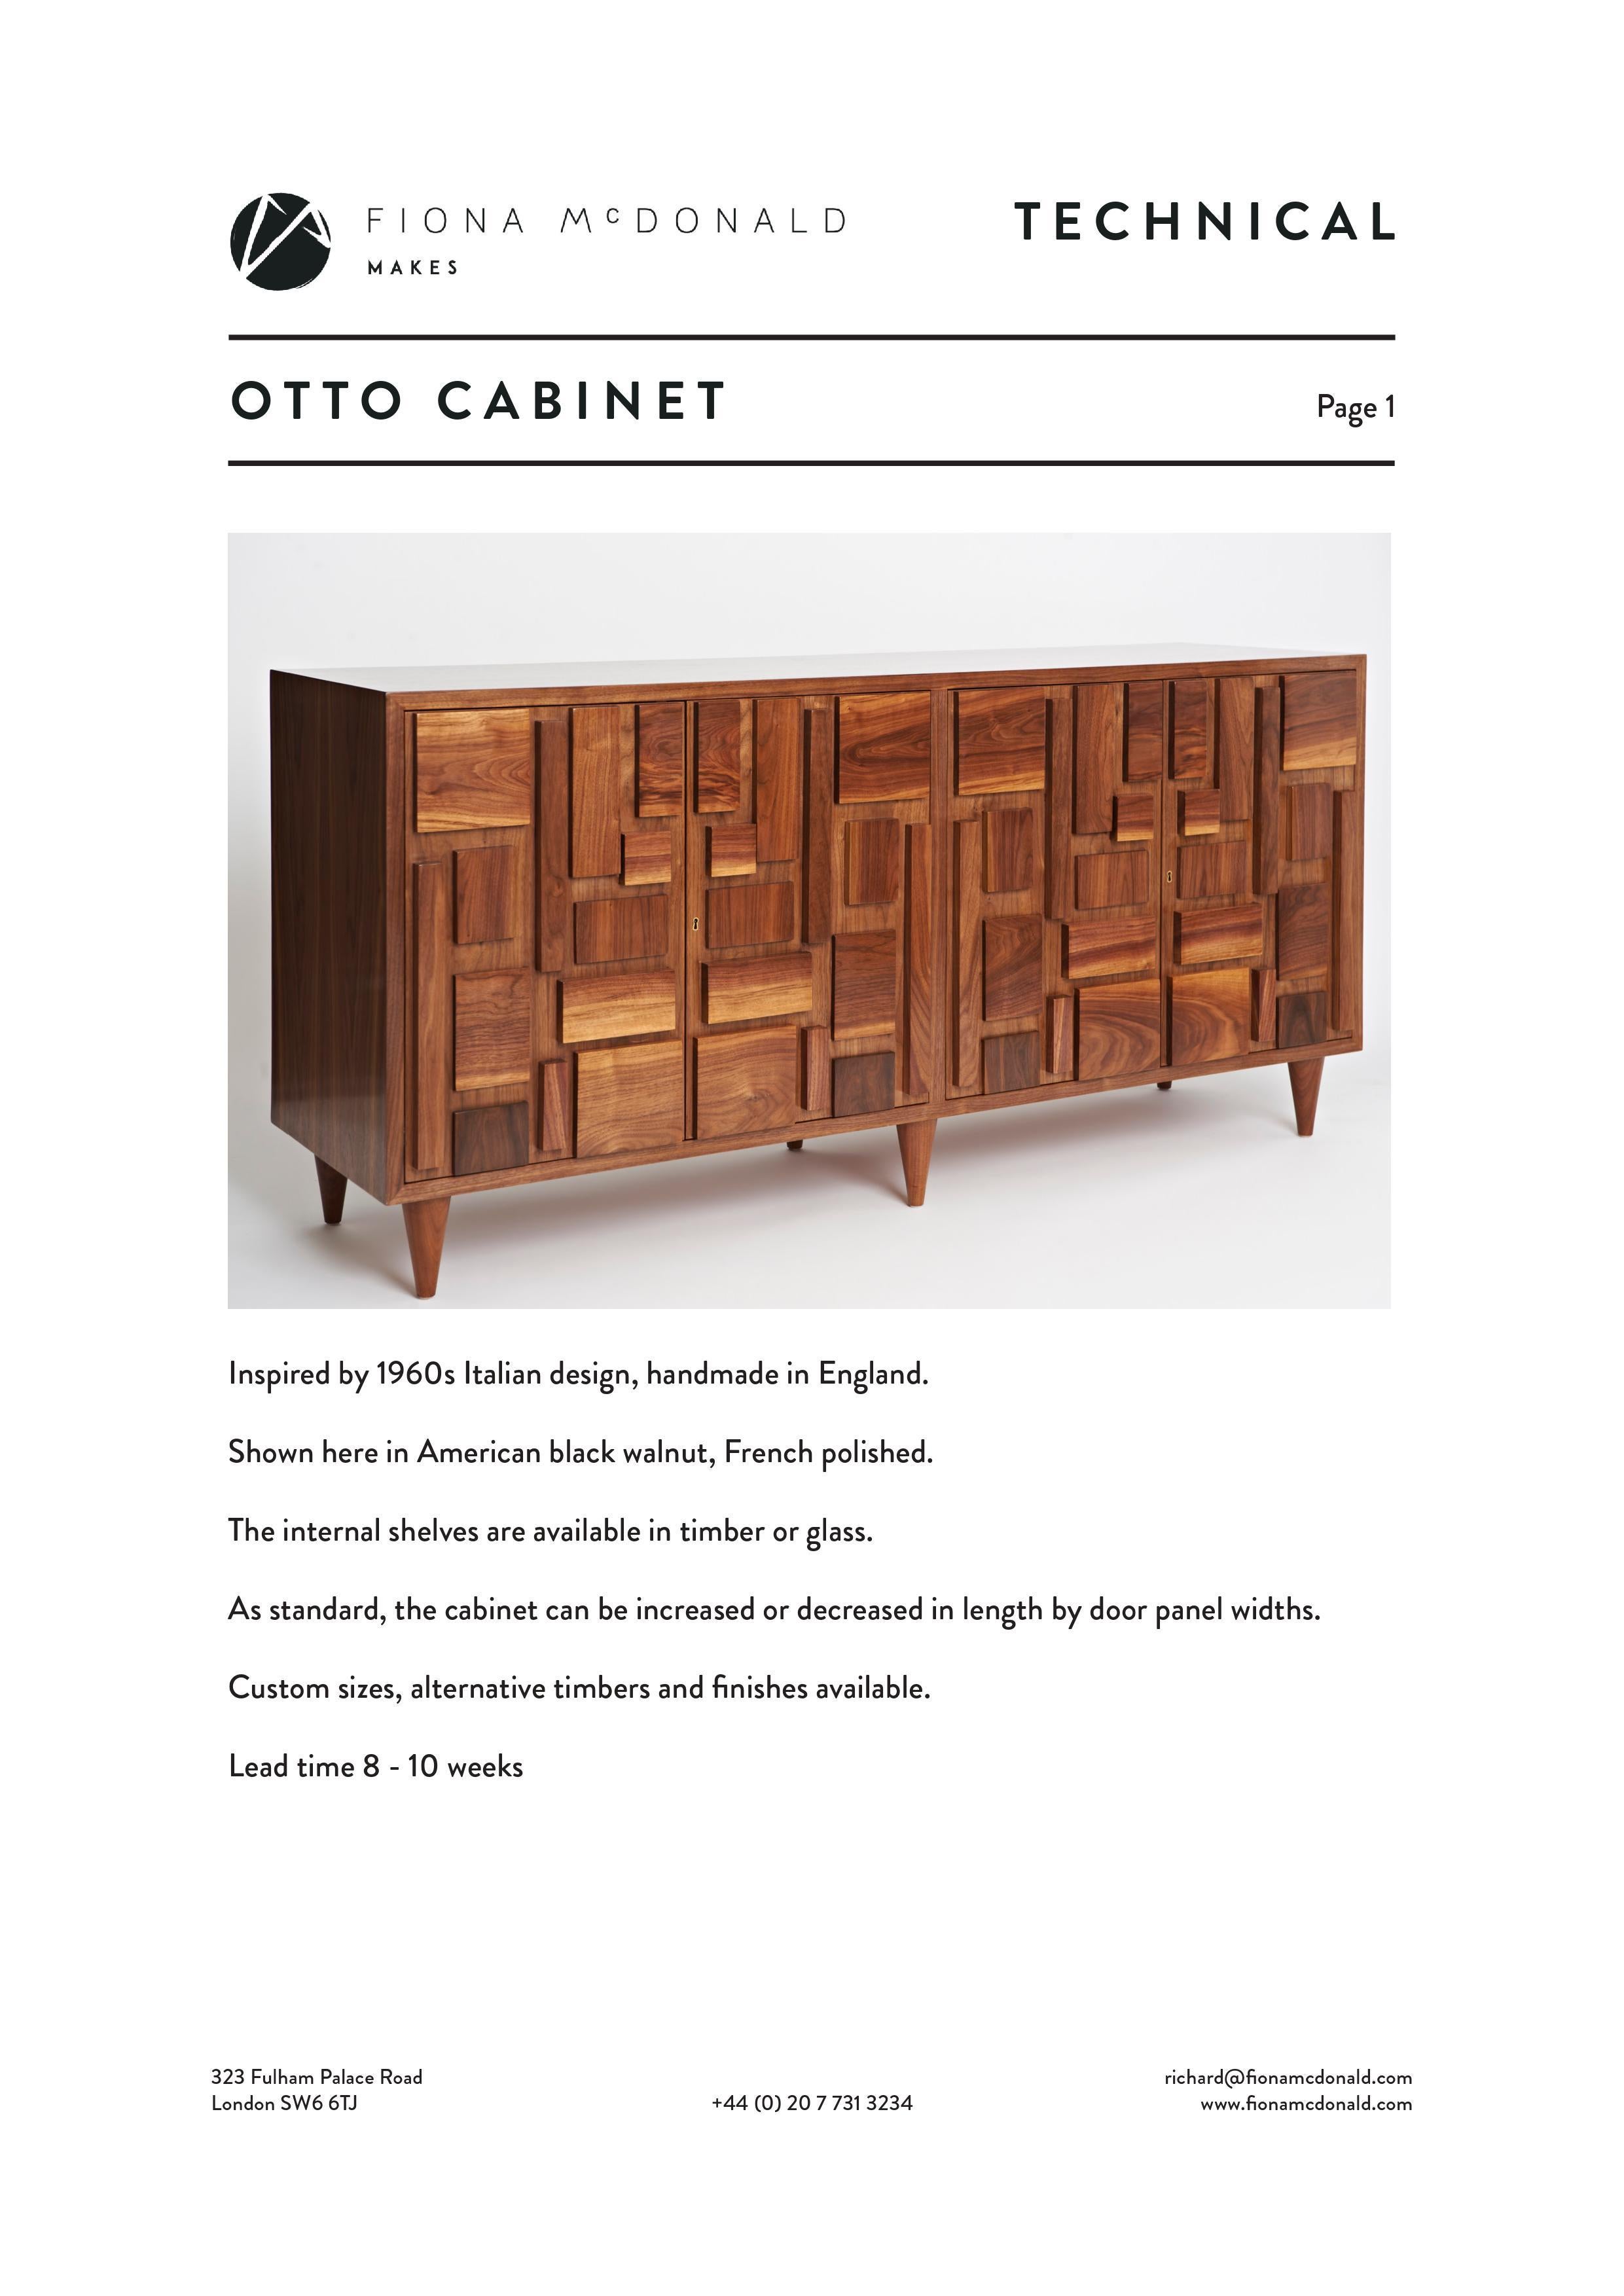 Otto Sideboard - Bespoke - French Polished Walnut with Antique Brass Key For Sale 3